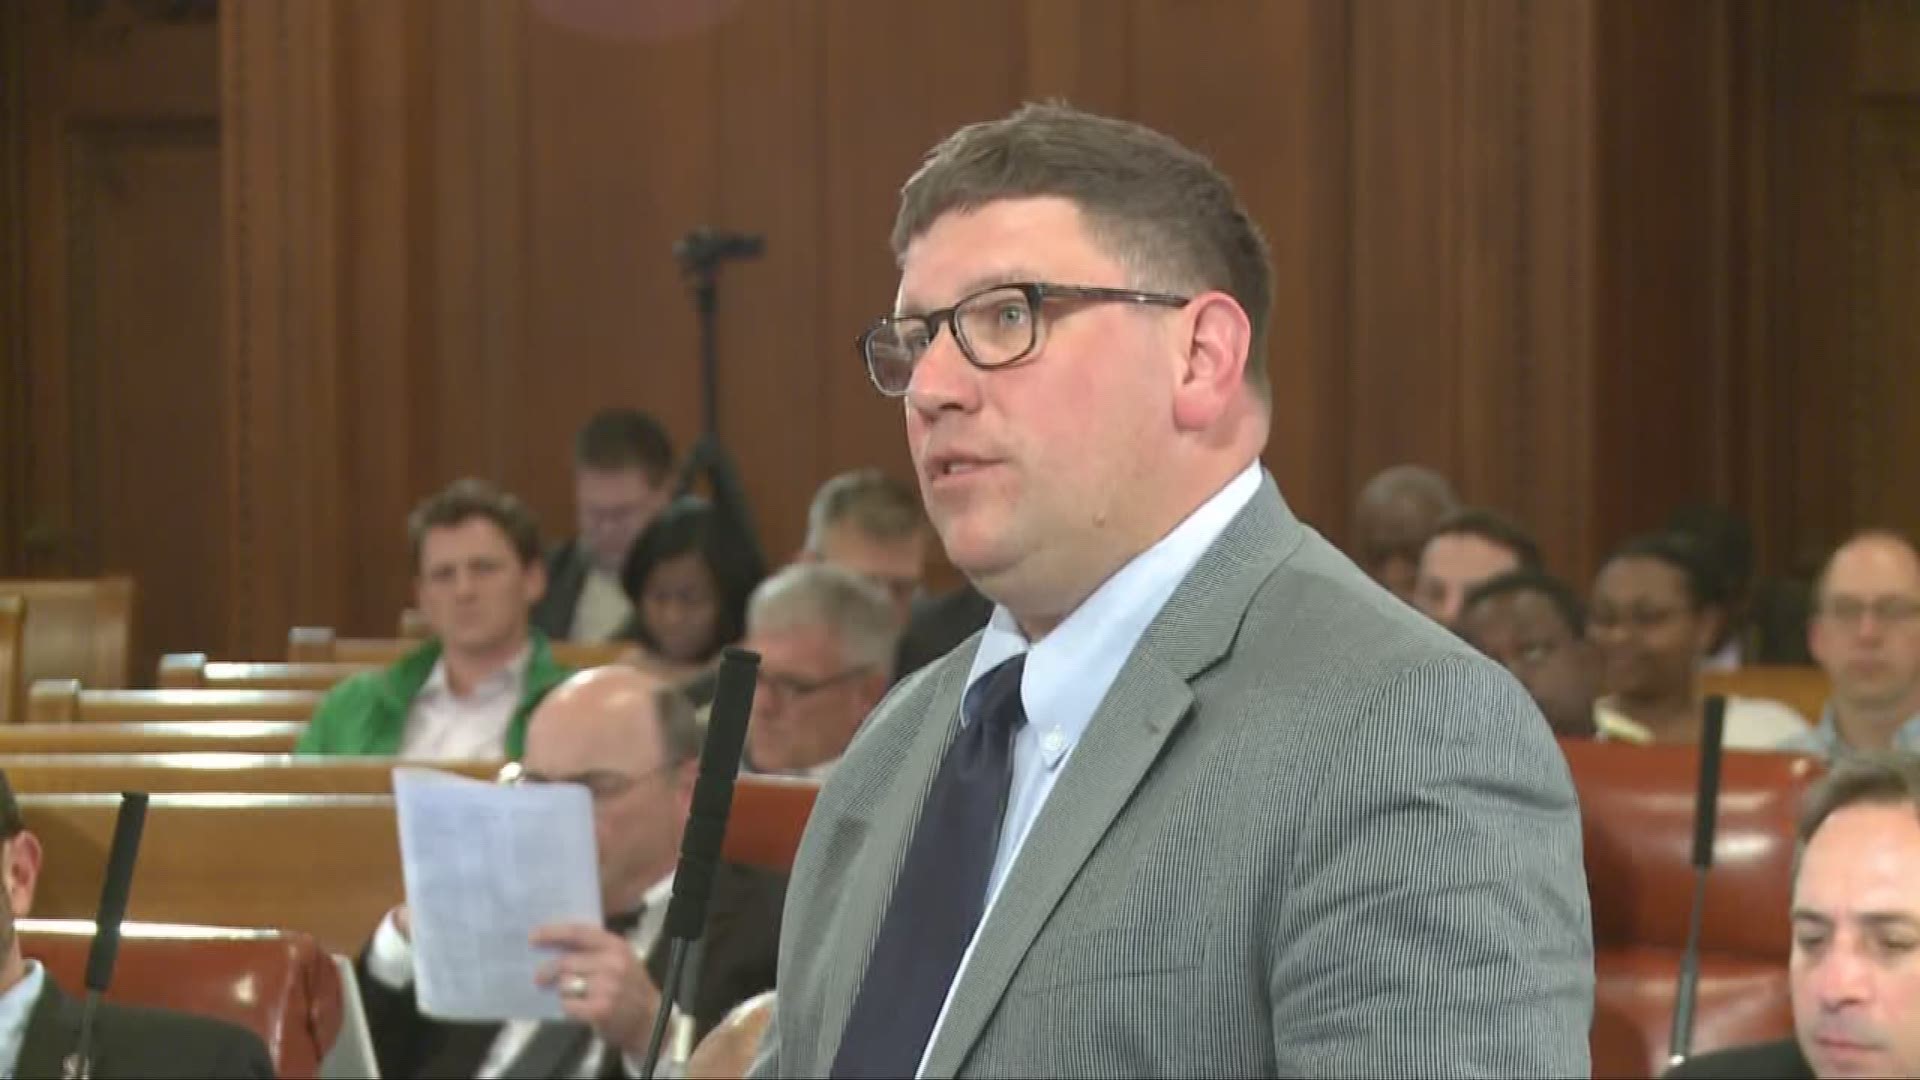 Former Cleveland City Councilman Joe Cimperman charged with multiple ethics violations